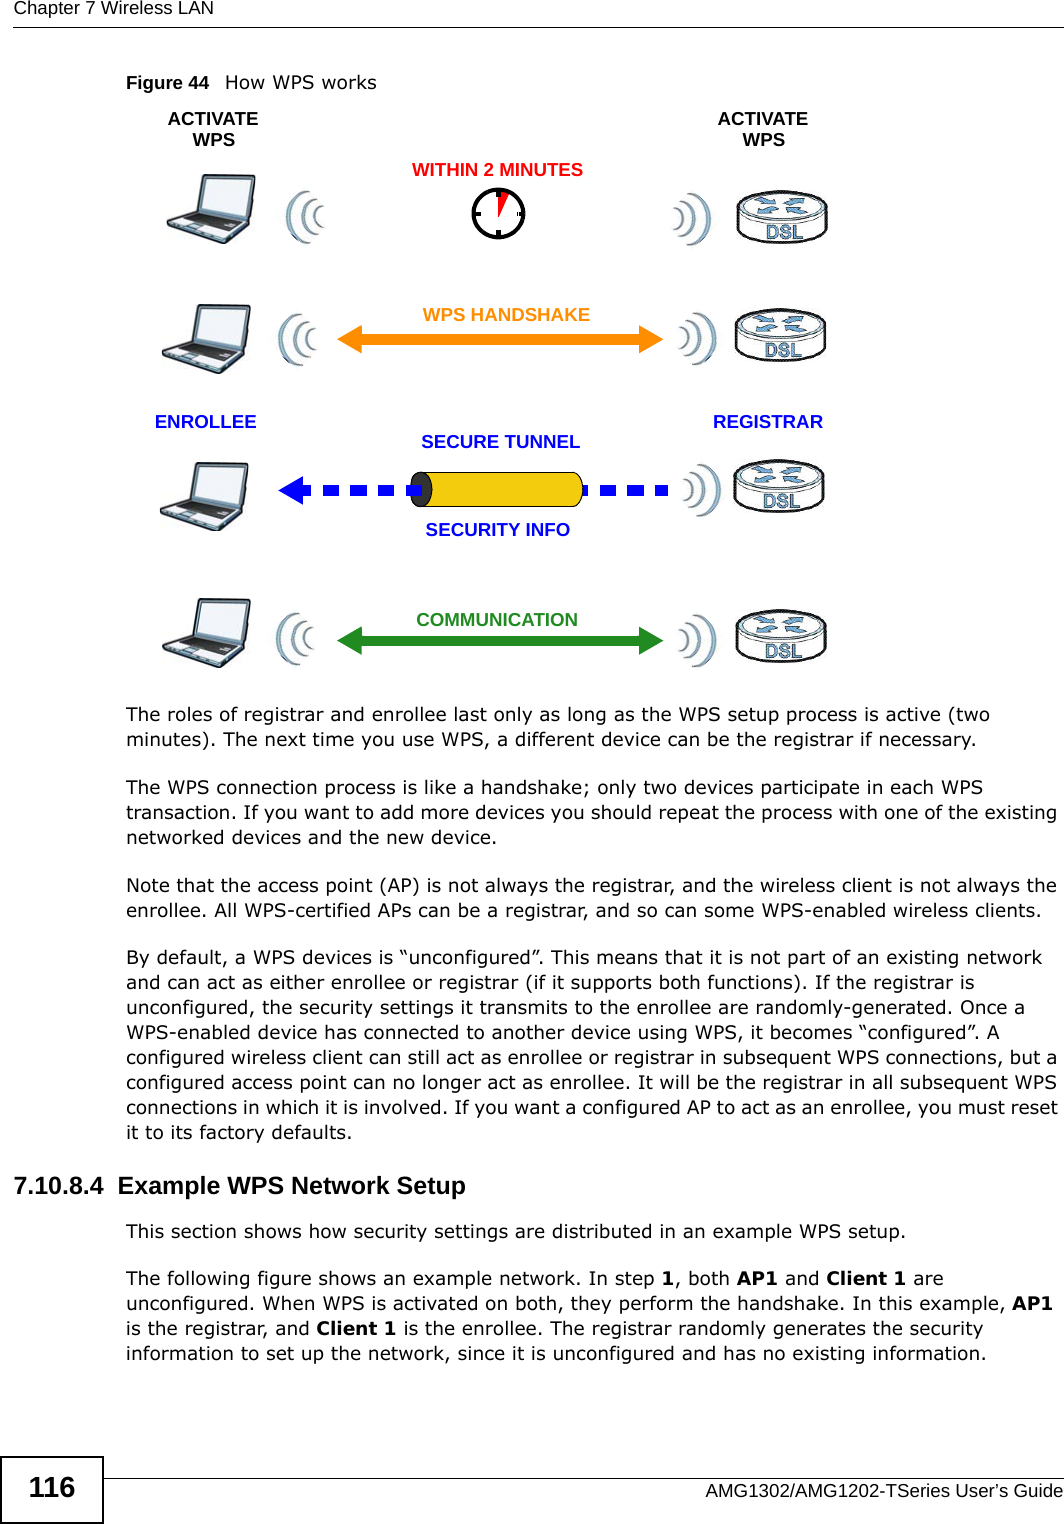 Chapter 7 Wireless LANAMG1302/AMG1202-TSeries User’s Guide116Figure 44   How WPS worksThe roles of registrar and enrollee last only as long as the WPS setup process is active (two minutes). The next time you use WPS, a different device can be the registrar if necessary.The WPS connection process is like a handshake; only two devices participate in each WPS transaction. If you want to add more devices you should repeat the process with one of the existing networked devices and the new device.Note that the access point (AP) is not always the registrar, and the wireless client is not always the enrollee. All WPS-certified APs can be a registrar, and so can some WPS-enabled wireless clients.By default, a WPS devices is “unconfigured”. This means that it is not part of an existing network and can act as either enrollee or registrar (if it supports both functions). If the registrar is unconfigured, the security settings it transmits to the enrollee are randomly-generated. Once a WPS-enabled device has connected to another device using WPS, it becomes “configured”. A configured wireless client can still act as enrollee or registrar in subsequent WPS connections, but a configured access point can no longer act as enrollee. It will be the registrar in all subsequent WPS connections in which it is involved. If you want a configured AP to act as an enrollee, you must reset it to its factory defaults.7.10.8.4  Example WPS Network SetupThis section shows how security settings are distributed in an example WPS setup.The following figure shows an example network. In step 1, both AP1 and Client 1 are unconfigured. When WPS is activated on both, they perform the handshake. In this example, AP1 is the registrar, and Client 1 is the enrollee. The registrar randomly generates the security information to set up the network, since it is unconfigured and has no existing information.SECURE TUNNELSECURITY INFOWITHIN 2 MINUTESCOMMUNICATIONACTIVATEWPSACTIVATEWPSWPS HANDSHAKEREGISTRARENROLLEE